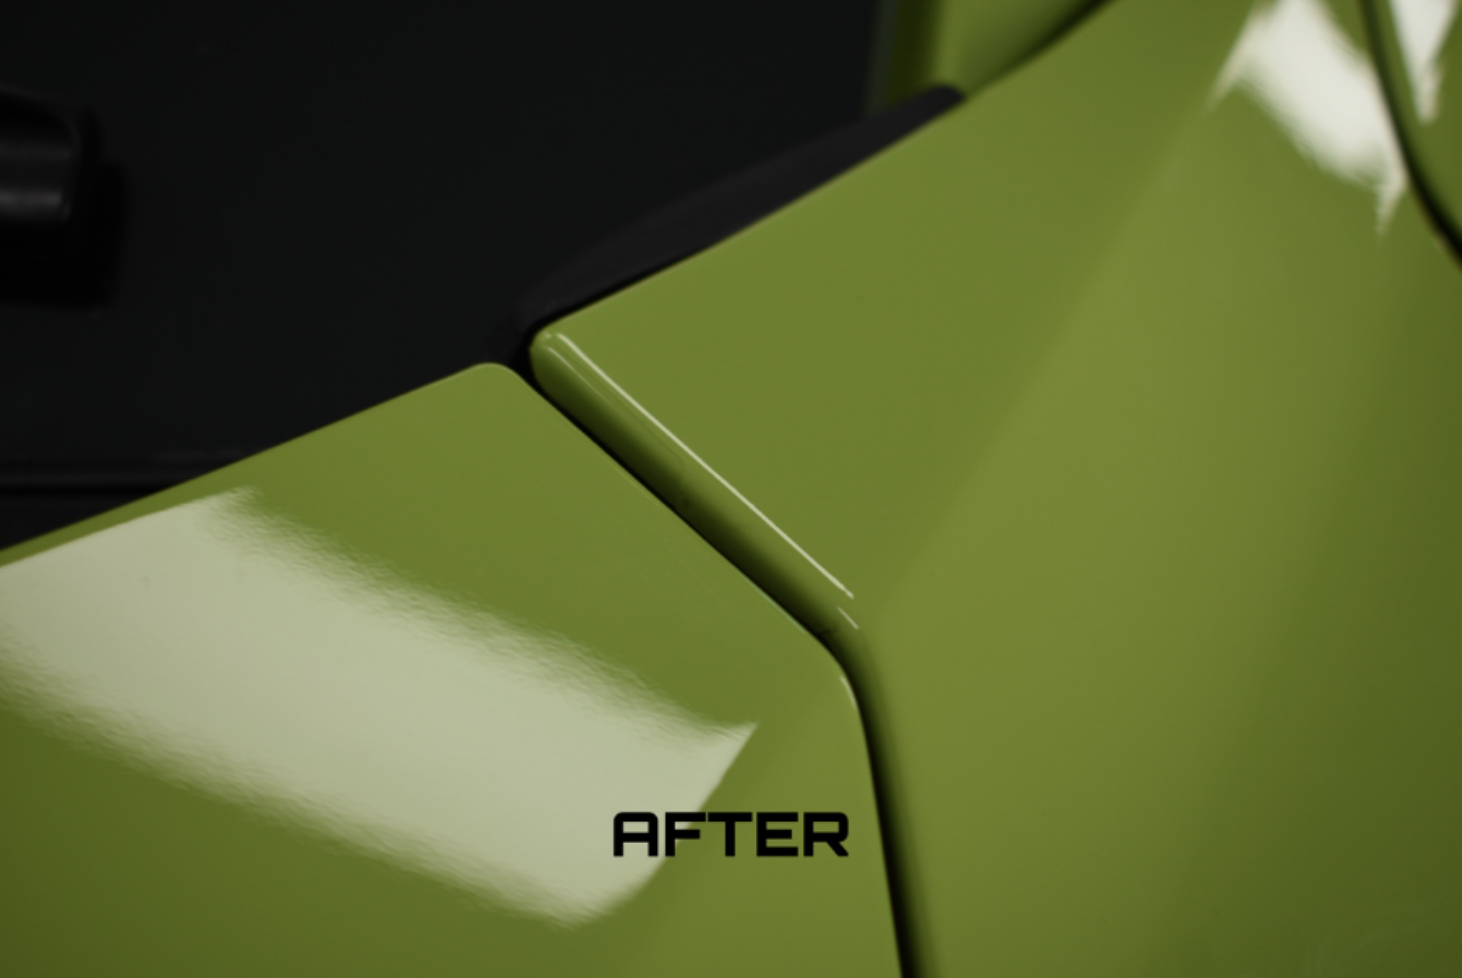 Cheap Paint Protection Film, Install vs Our Paint Protection Film Install